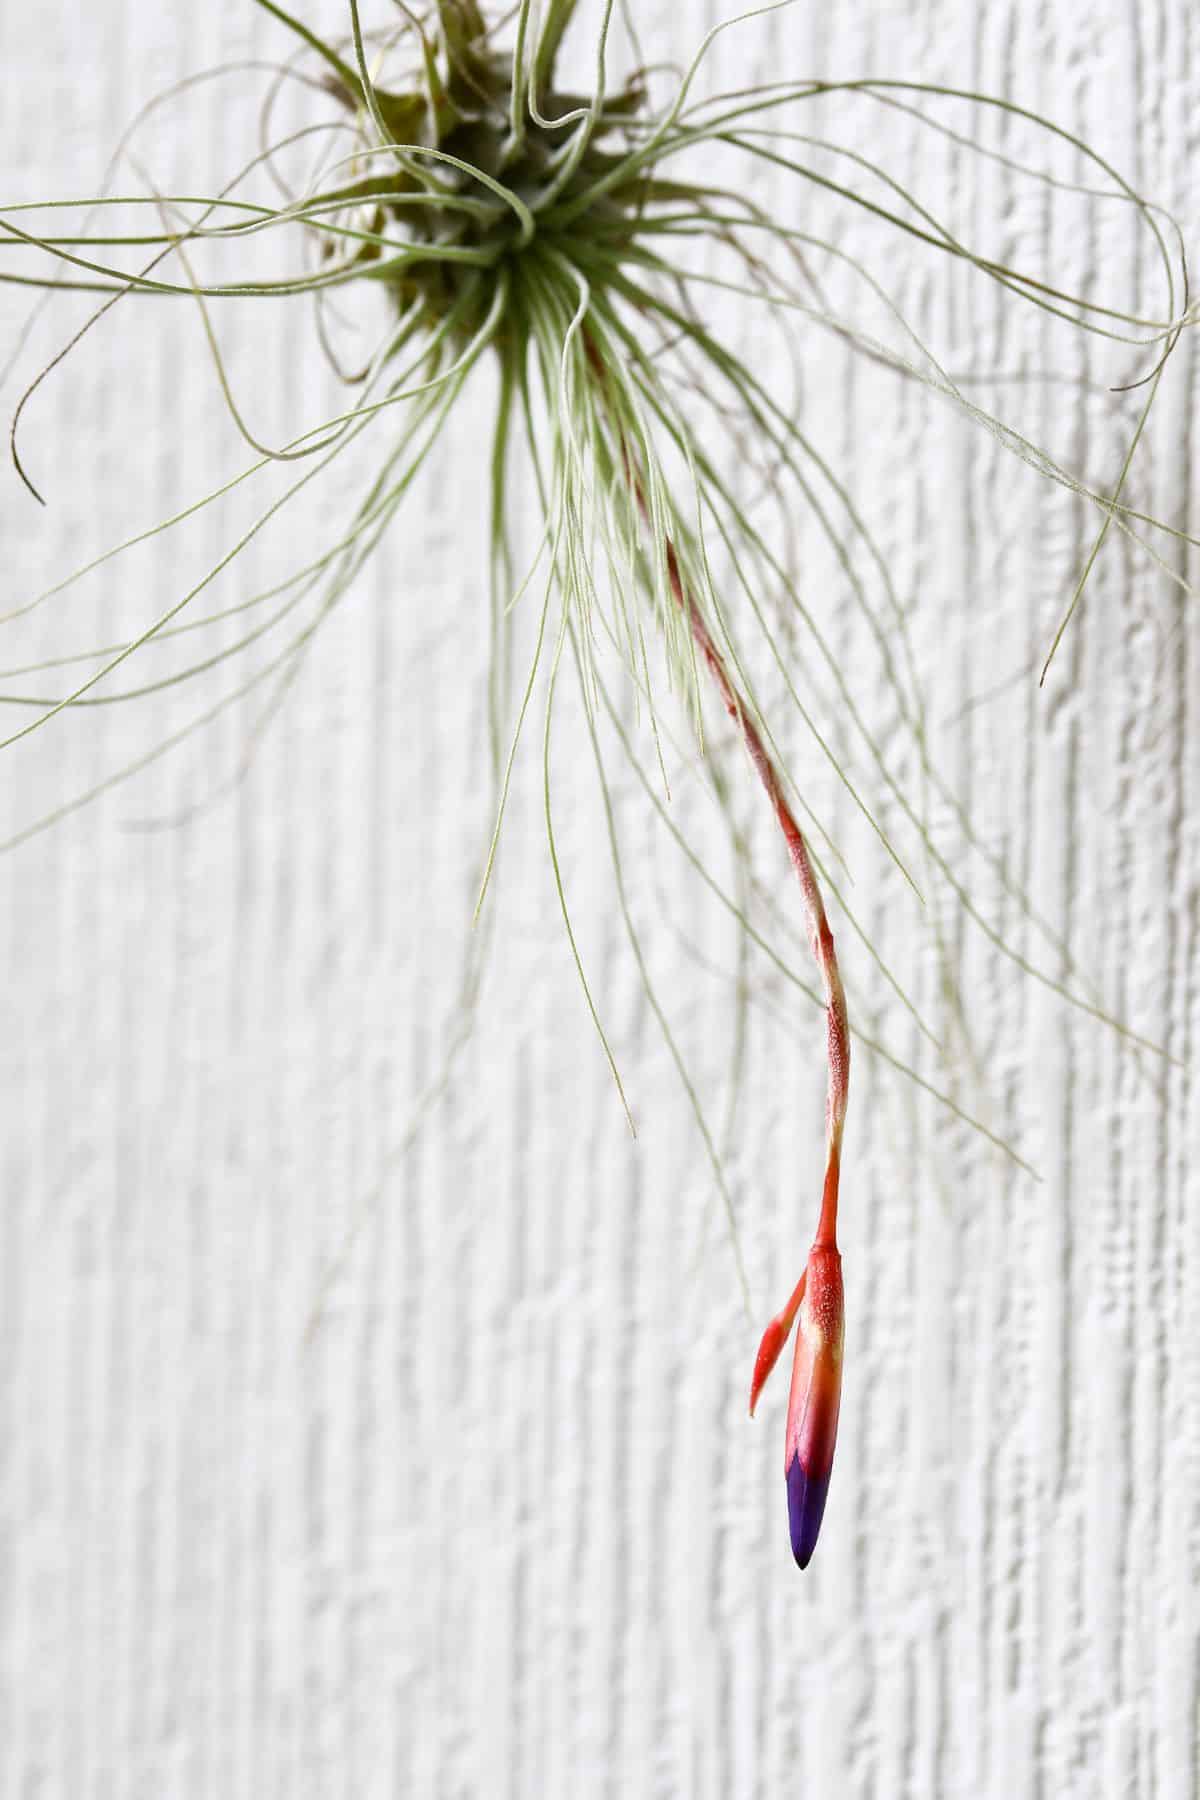 Fuchsii air plant with flower stalk hanging down